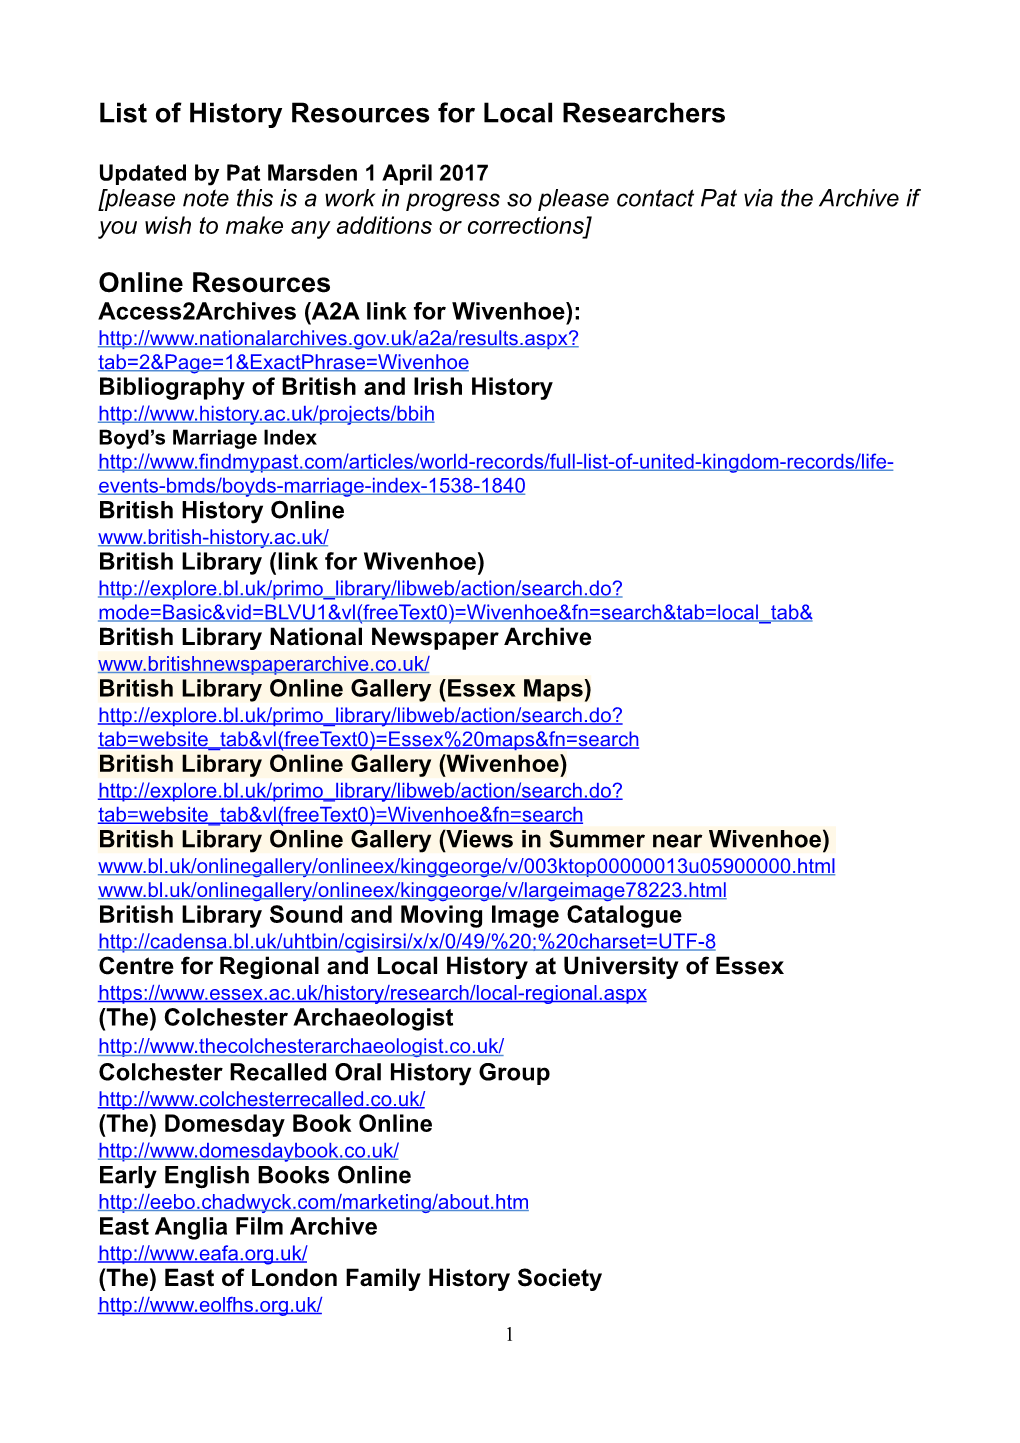 History Group Resources